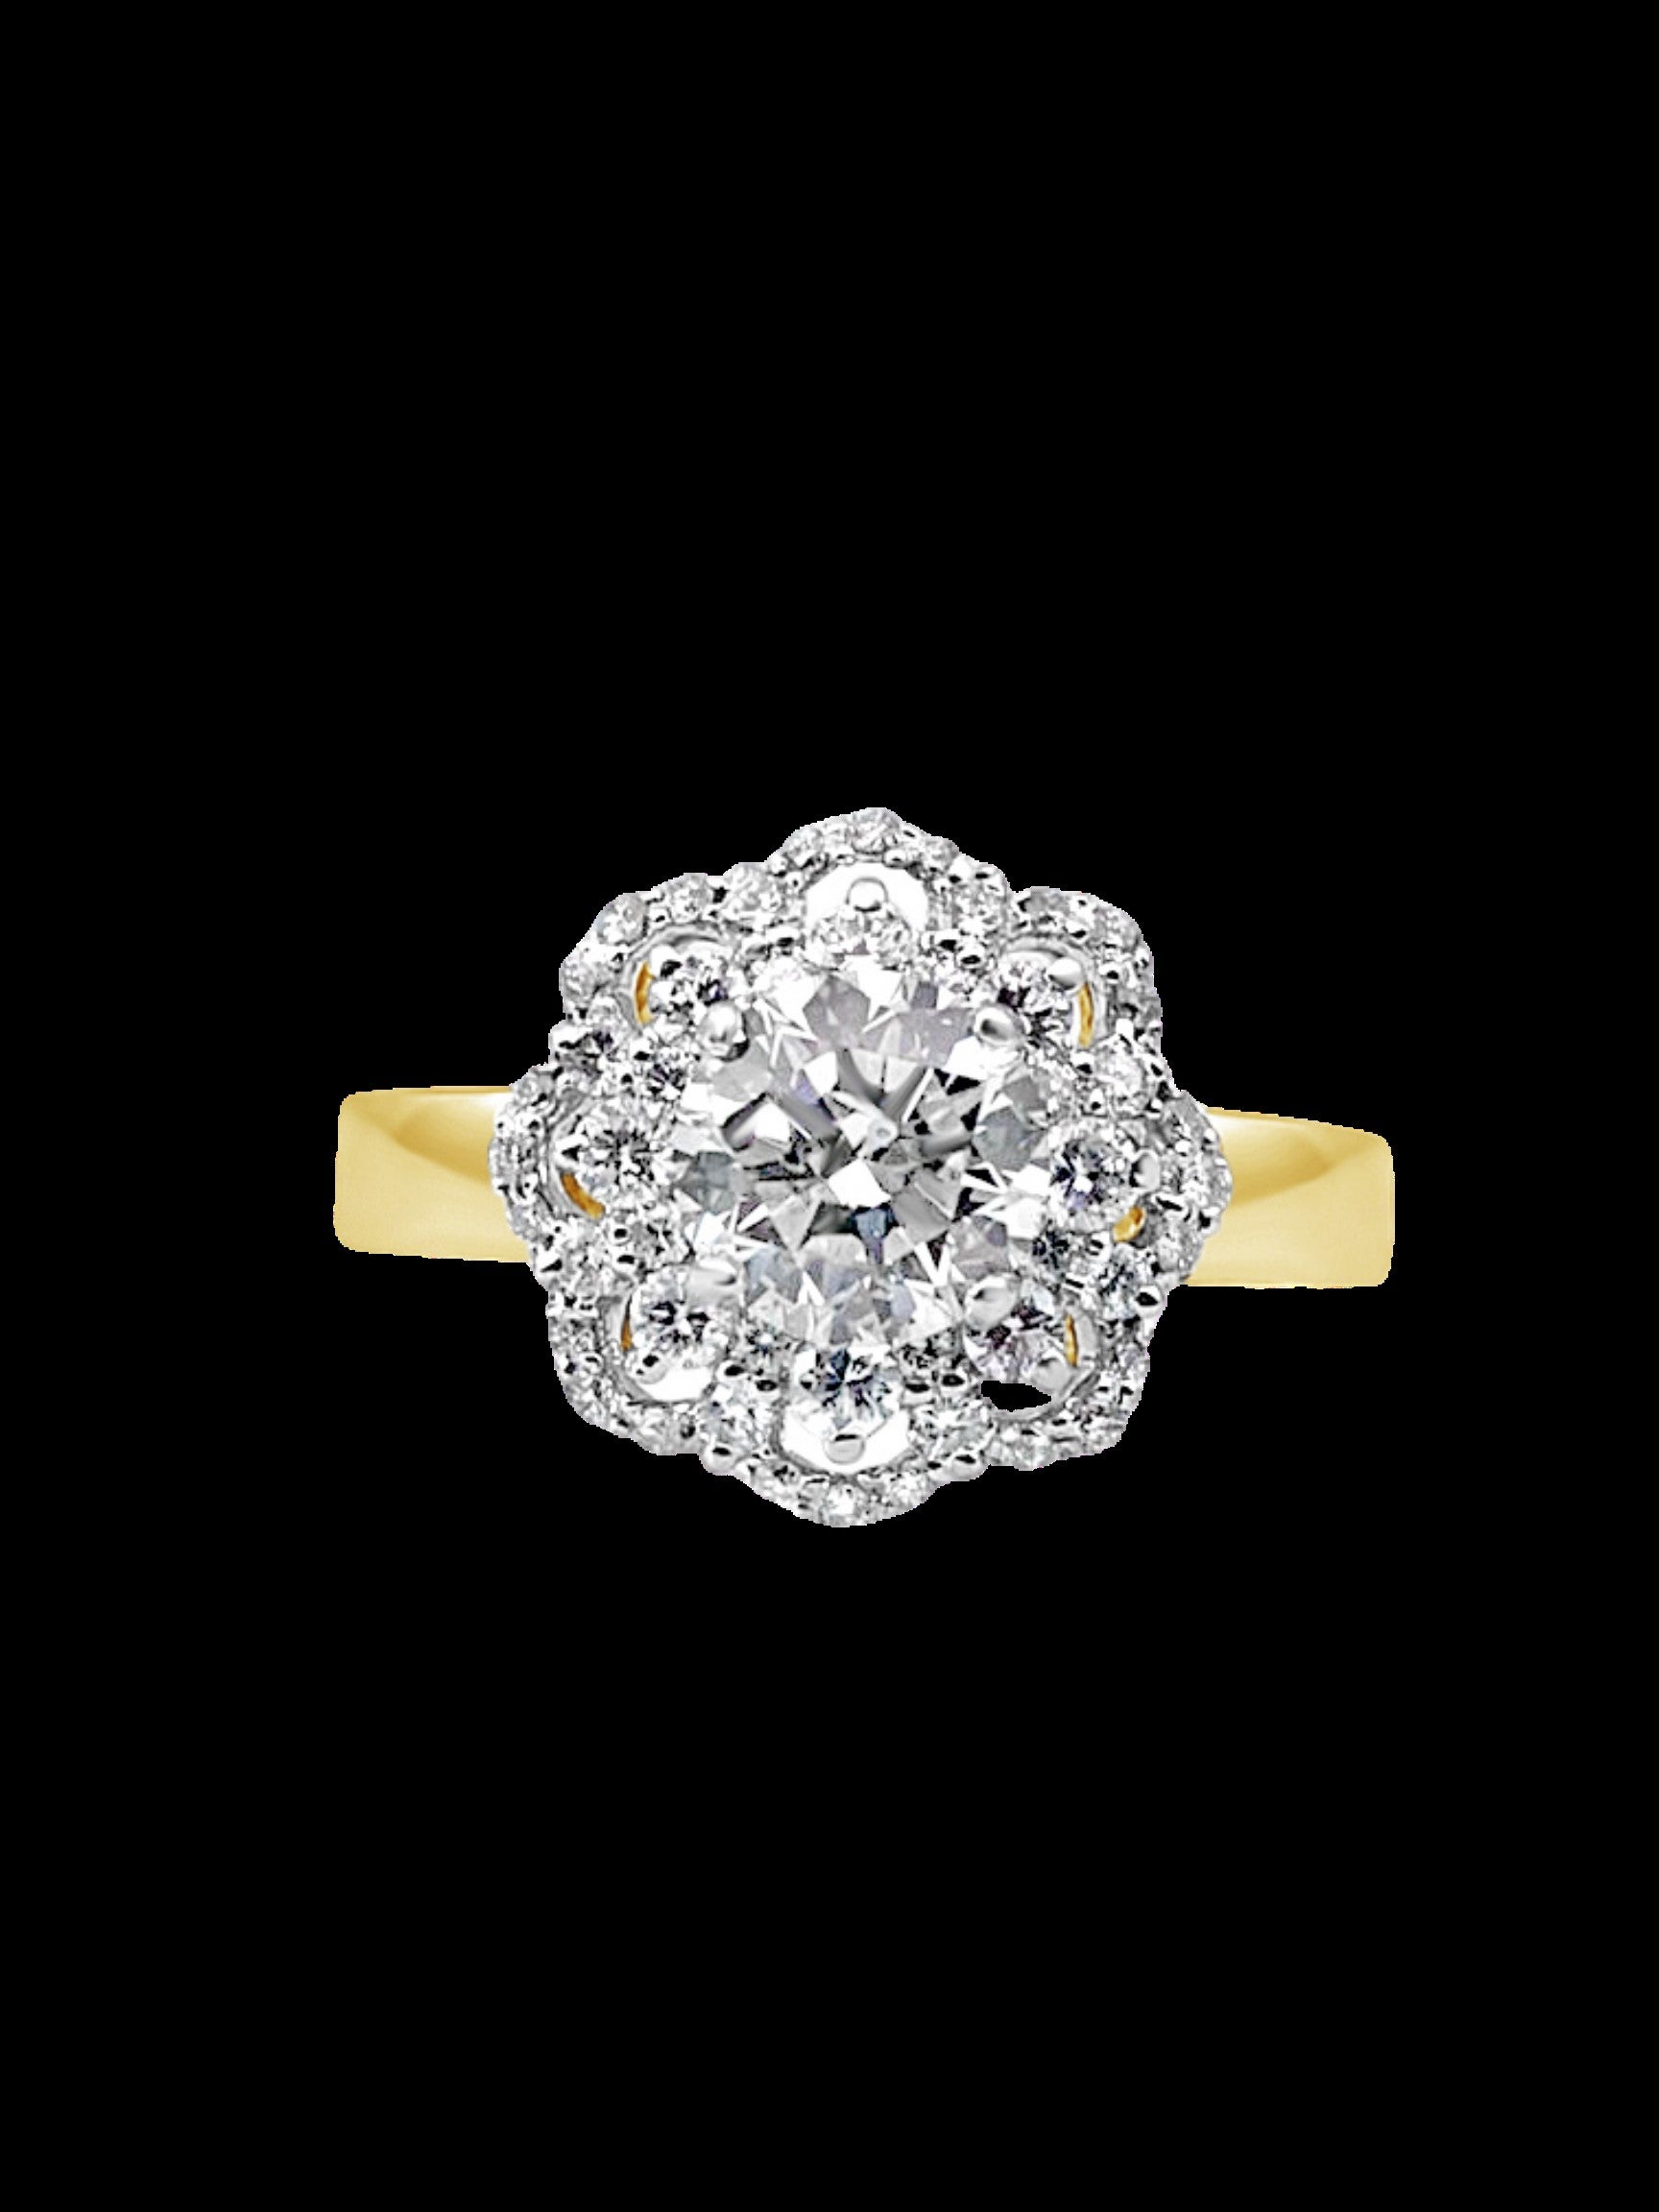 The Lona diamond ring features a 1.03-carat diamond solitaire center stone surrounded by a diamond encrusted gold band, made in a 18K yellow gold. A beautiful accent ring, delicate yet dazzling, or that very special engagement ring for the future